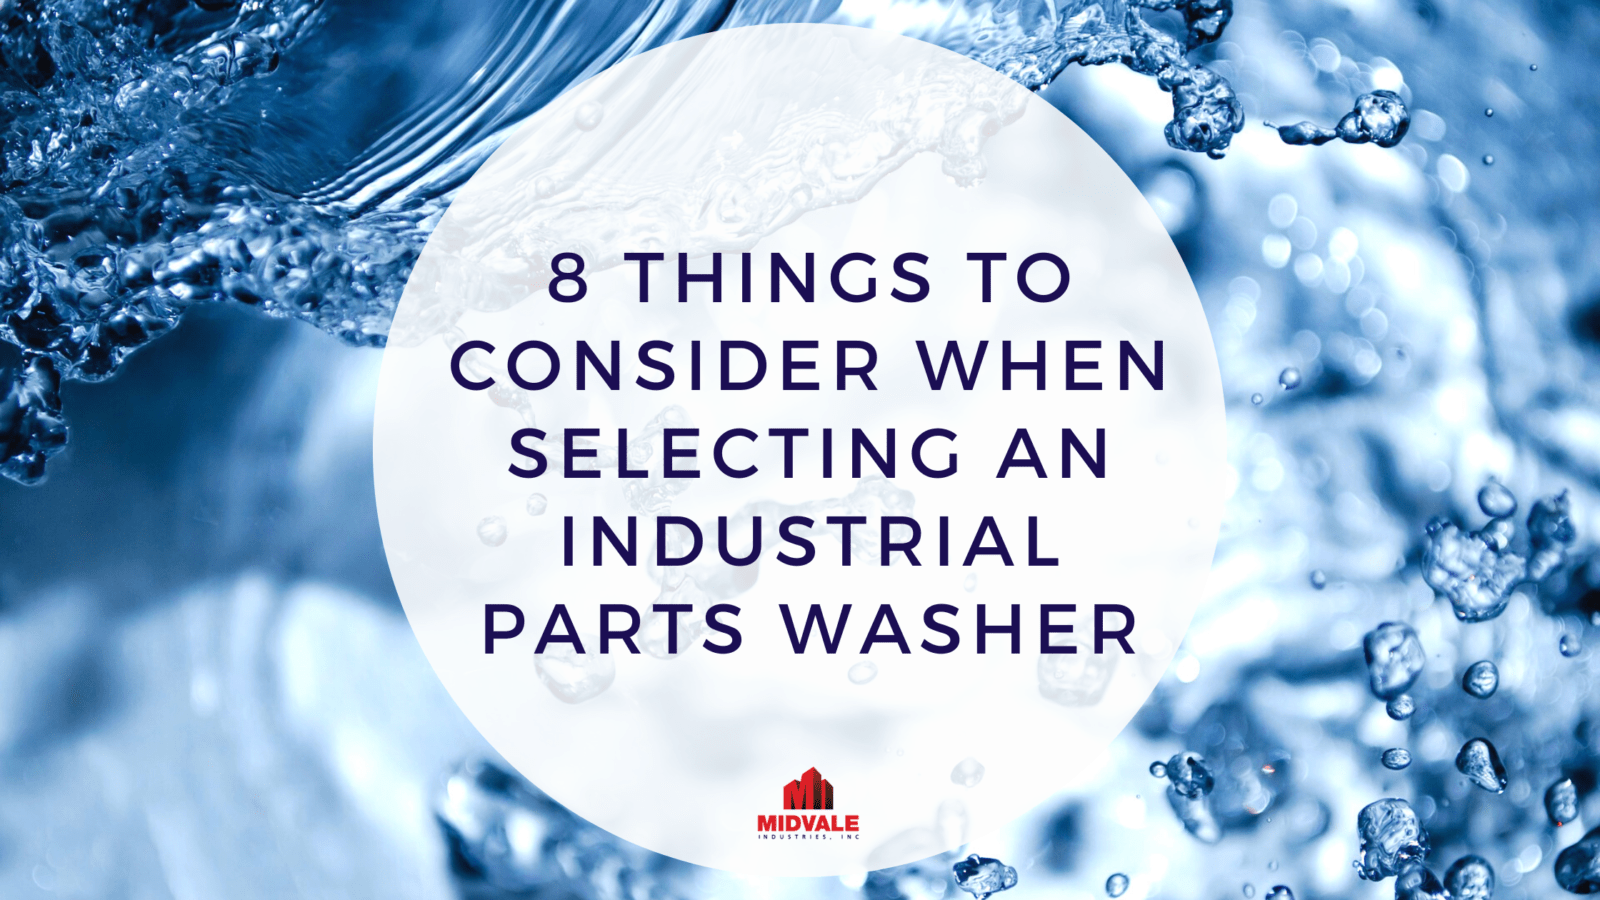 8 Things To Consider When Selecting an Industrial Parts Washer